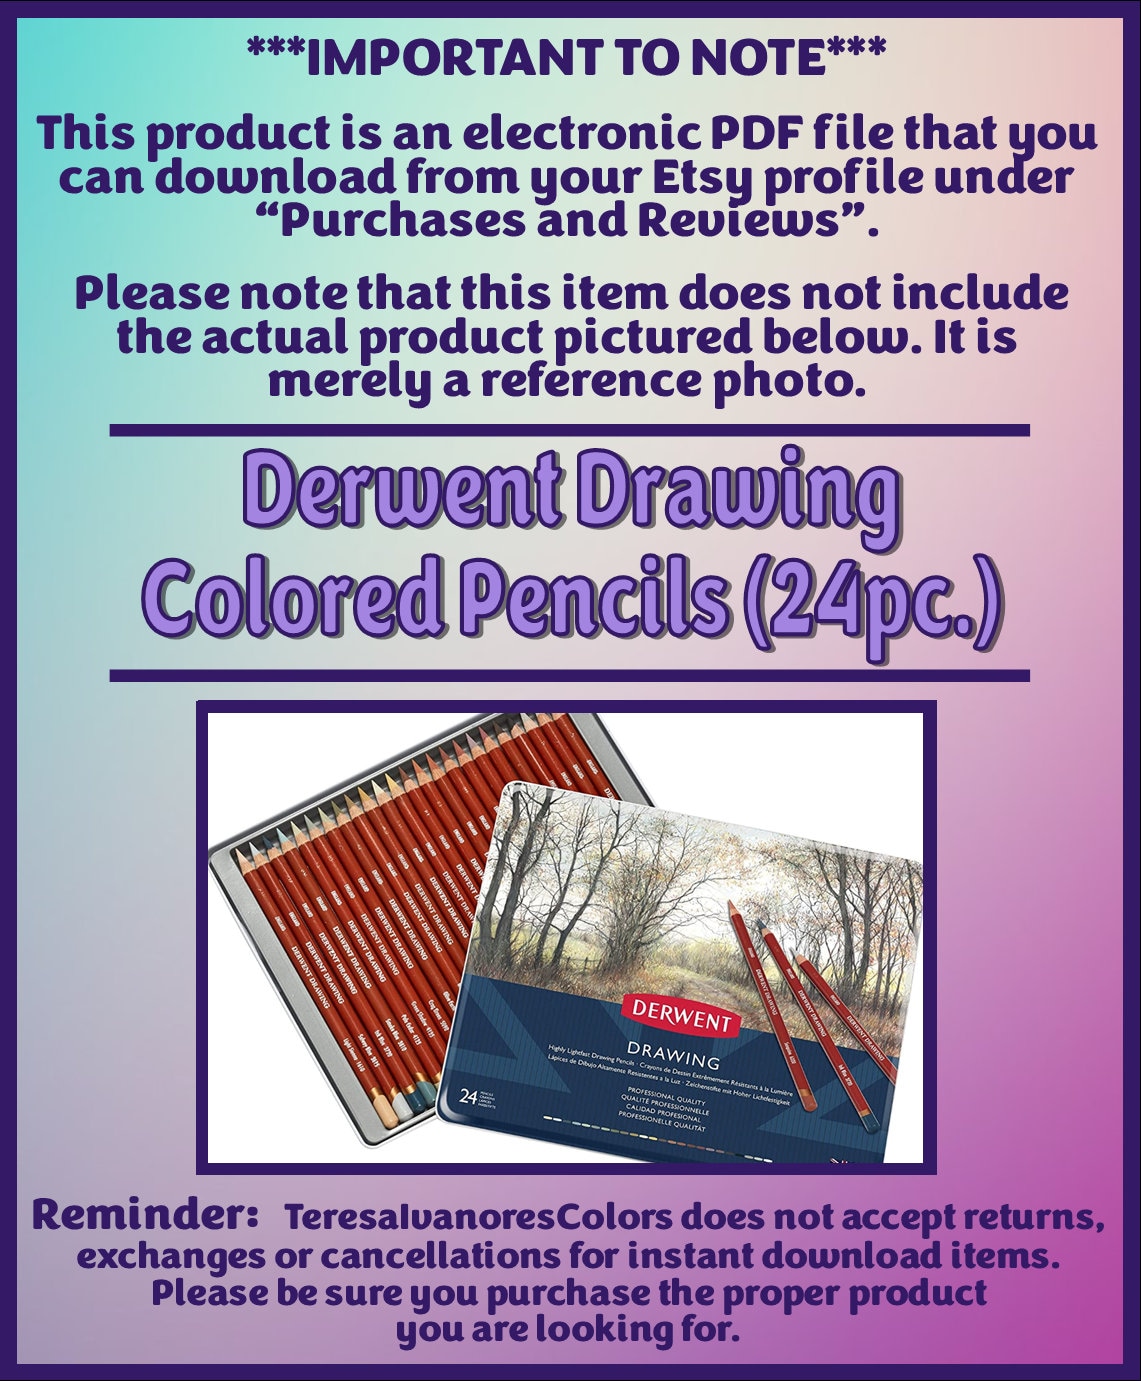 DERWENT DRAWING PENCILS REVIEW  Reviewing the 24 Set of These